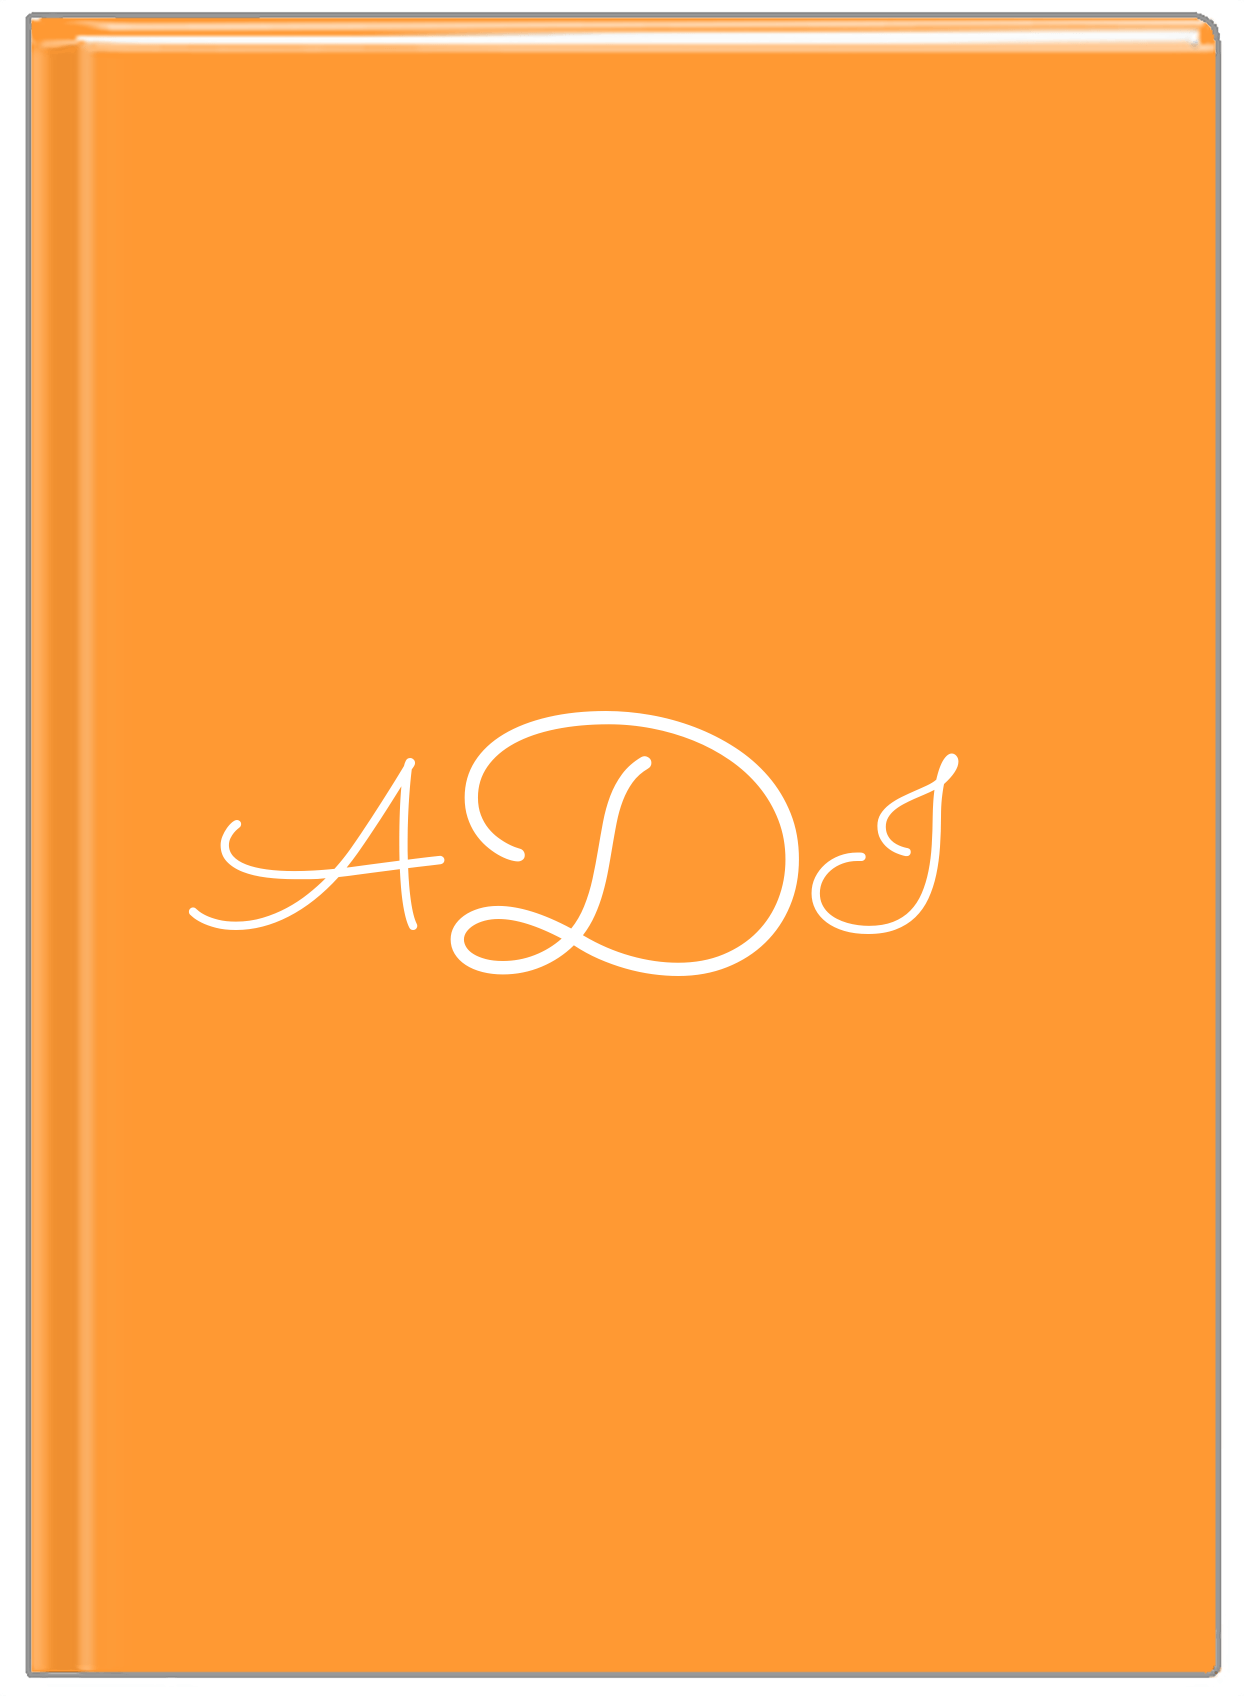 Personalized Solid Color Journal - Orange Background - Monogram - Front View